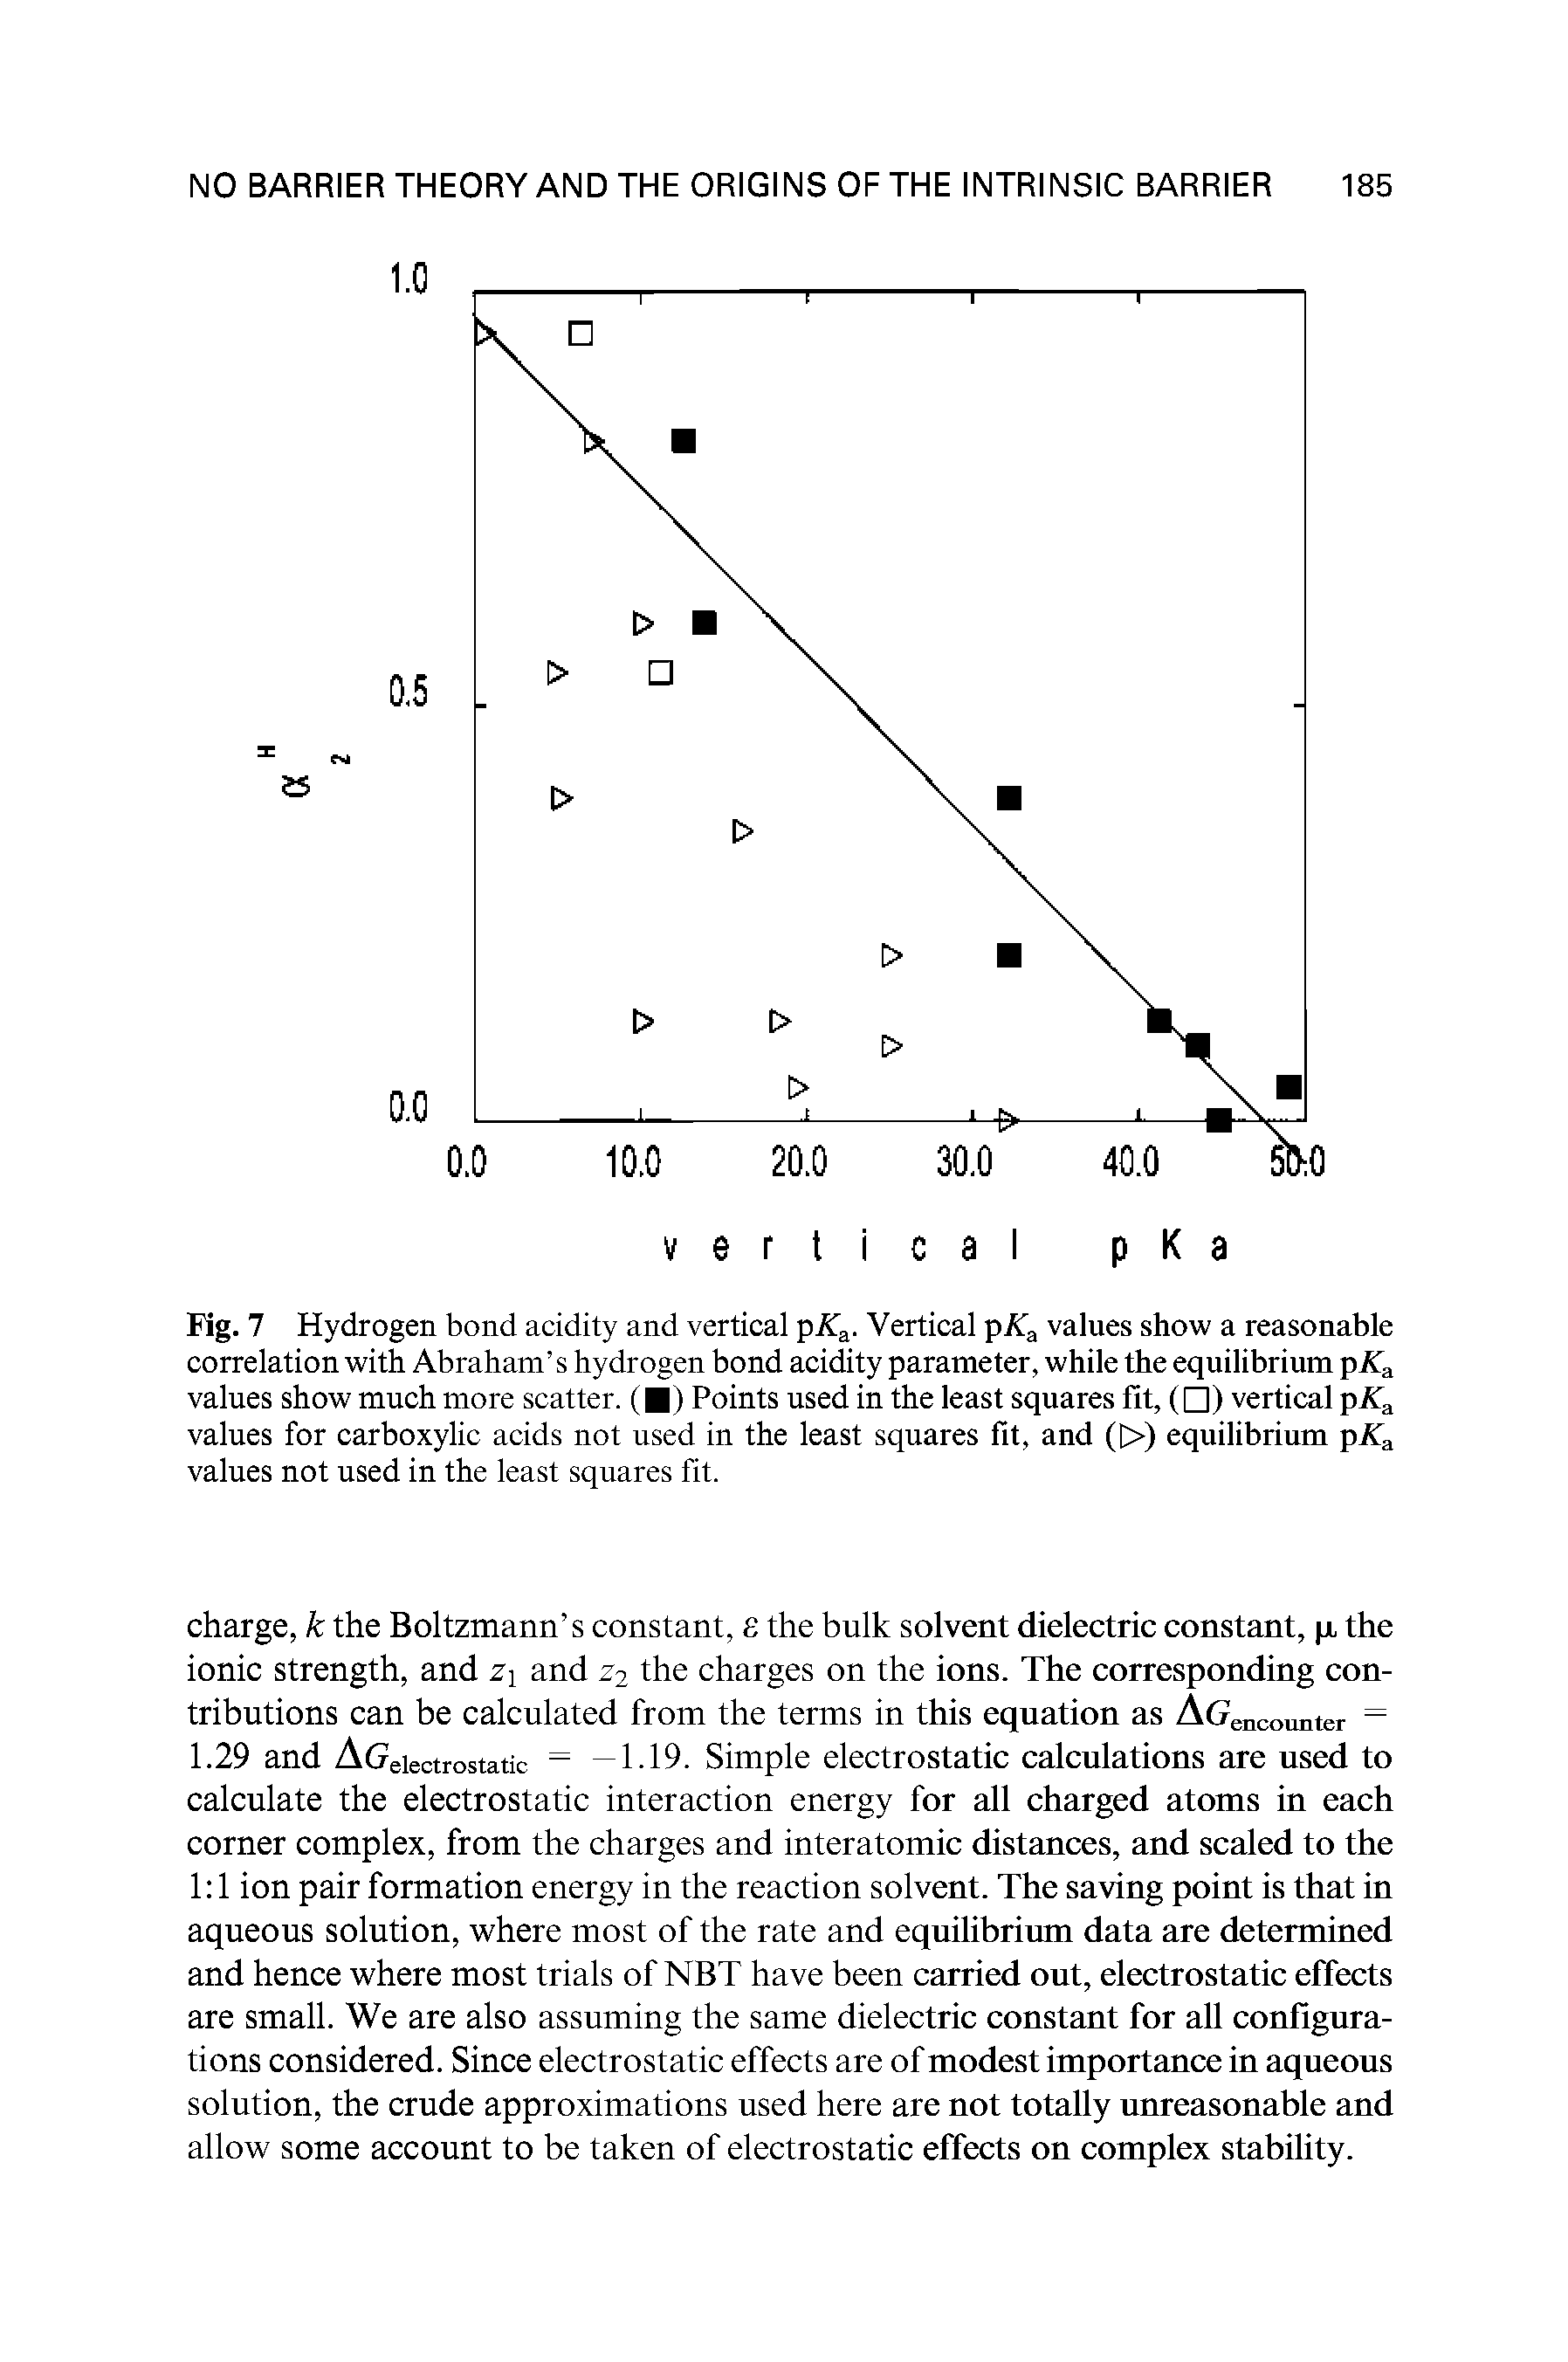 Fig. 7 Hydrogen bond acidity and vertical pK. Vertical pA a values show a reasonable correlation with Abraham s hydrogen bond acidity parameter, while the equilibrium pKa values show much more scatter. ( ) Points used in the least squares fit, ( ) vertical pATa values for carboxylic acids not used in the least squares fit, and ([>) equilibrium pK.A values not used in the least squares fit.